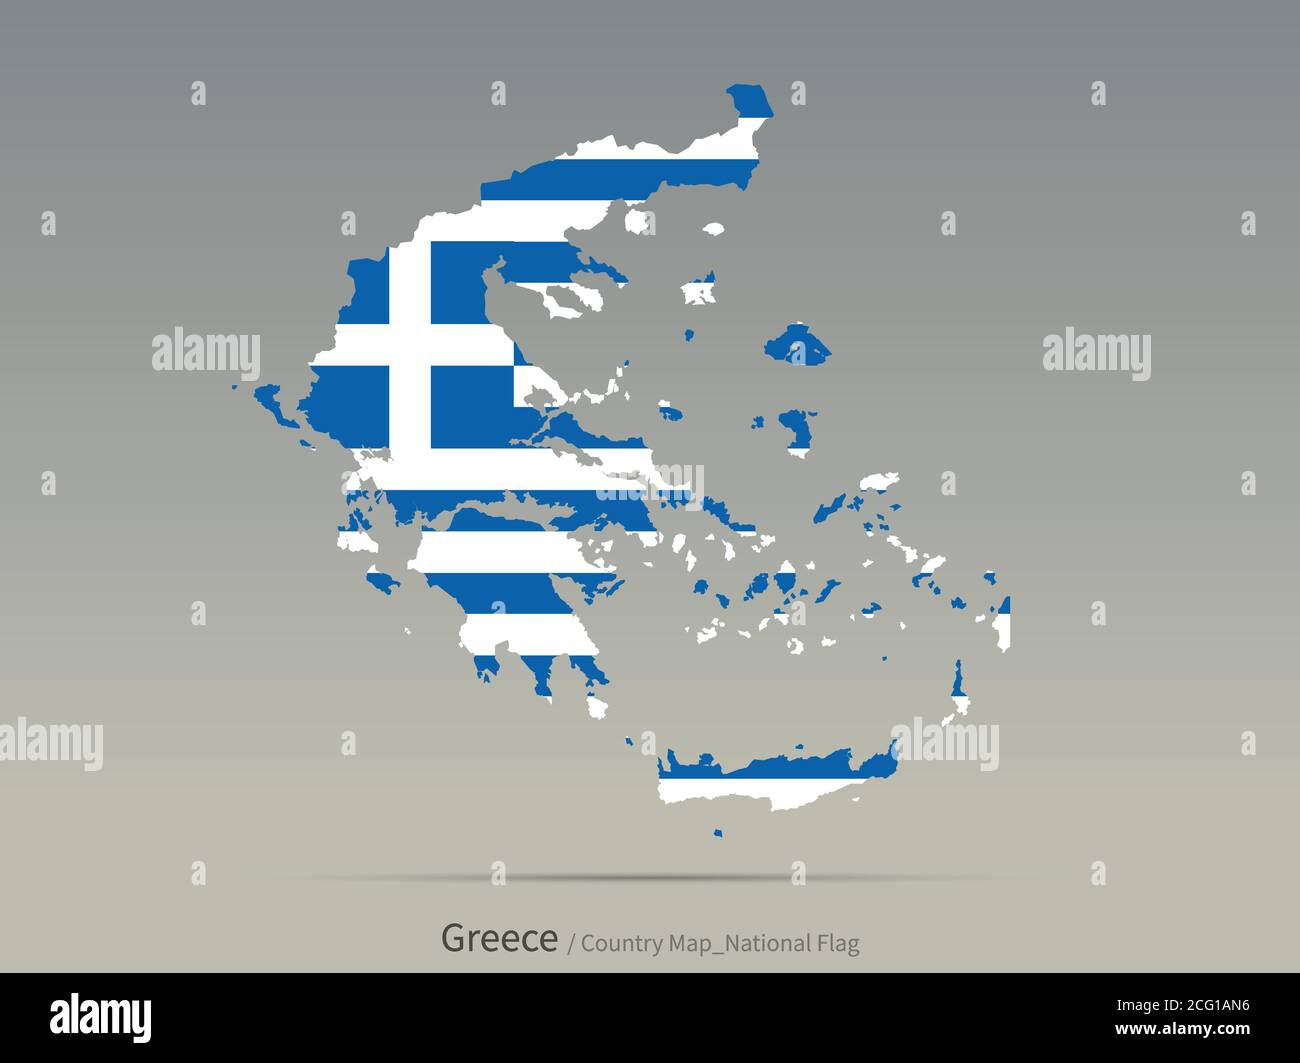 Greece Flag Isolated on Map. European countries map and flag. Stock Vector